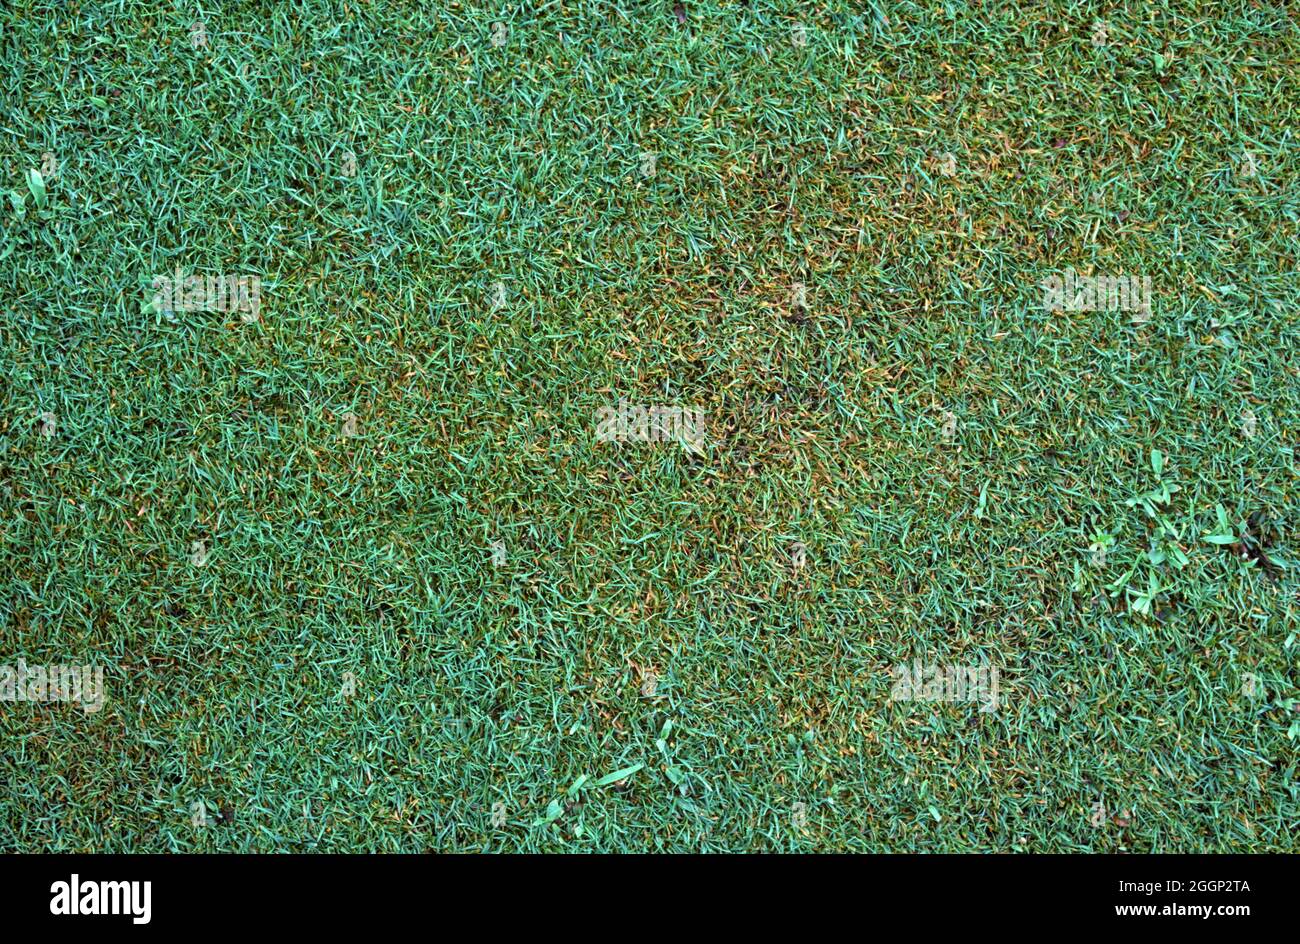 Rhizoctonia brown patch (Rhizoctonia solani) fungal disease infected area in close mown short golf green turfgrass, USA Stock Photo